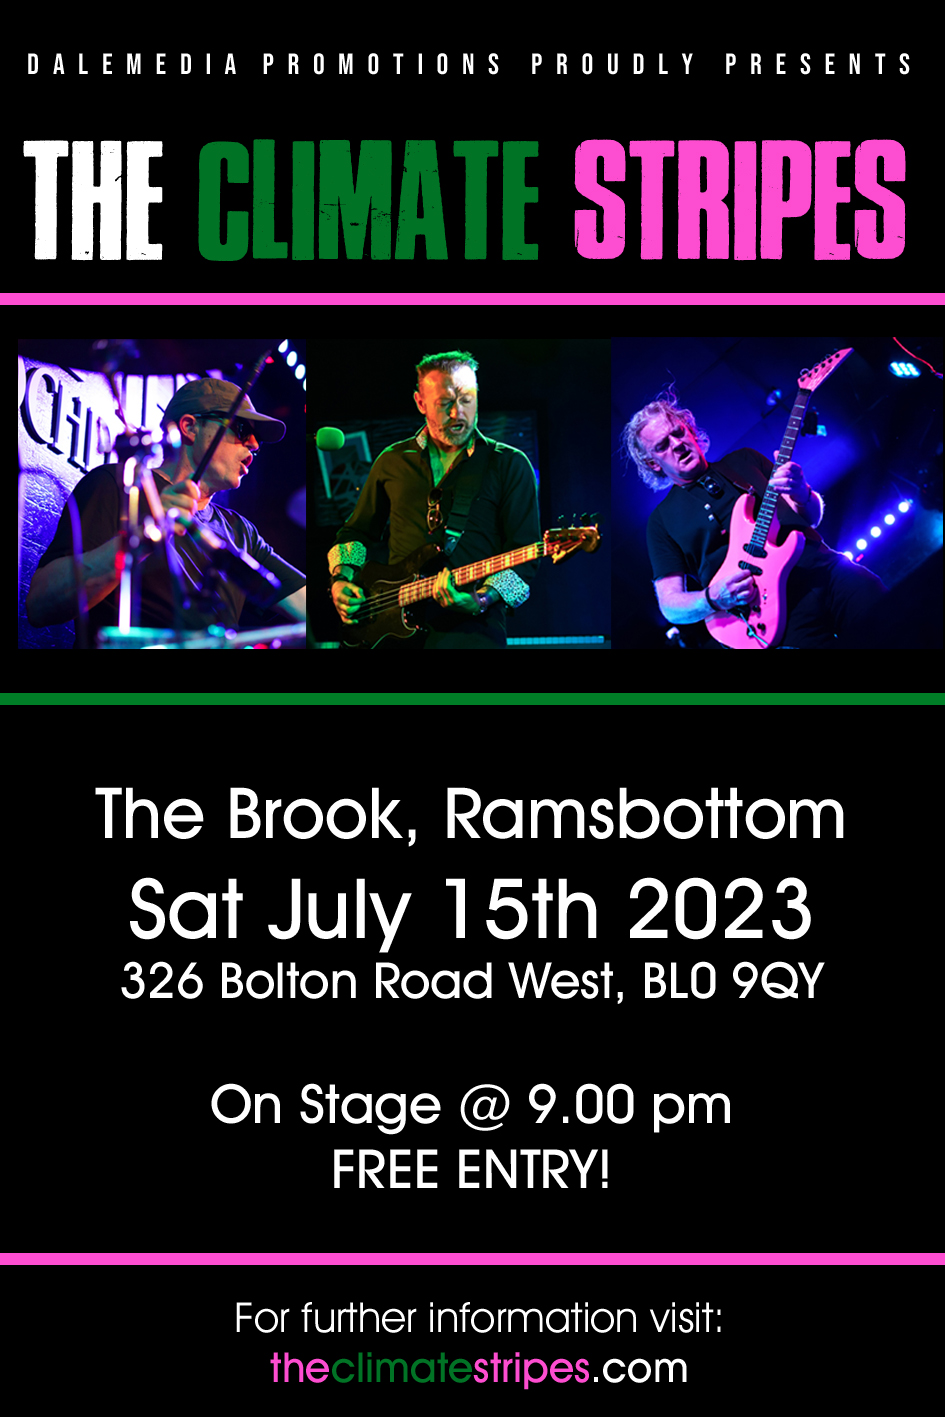 The Climate Stripes at The Brook Hotel, Ramsbottom on Saturday 15th July 2023!